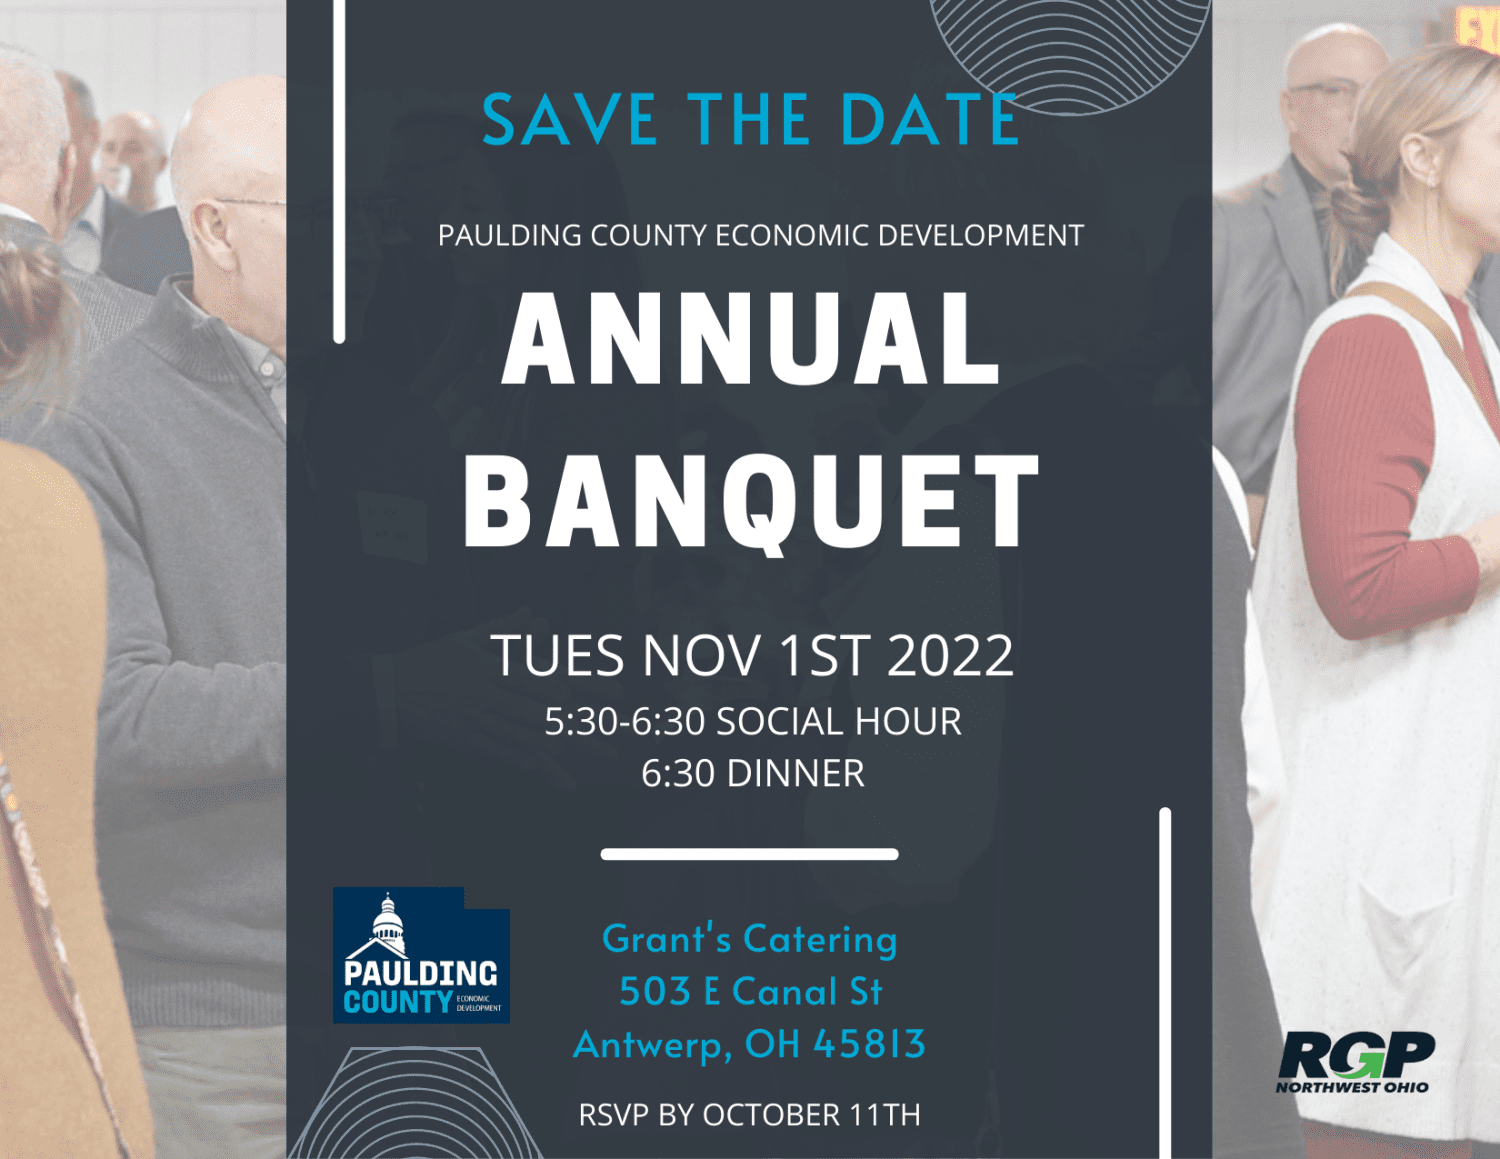 Business & Industry Appreciation Banquet on Tuesday, November 1, 2022